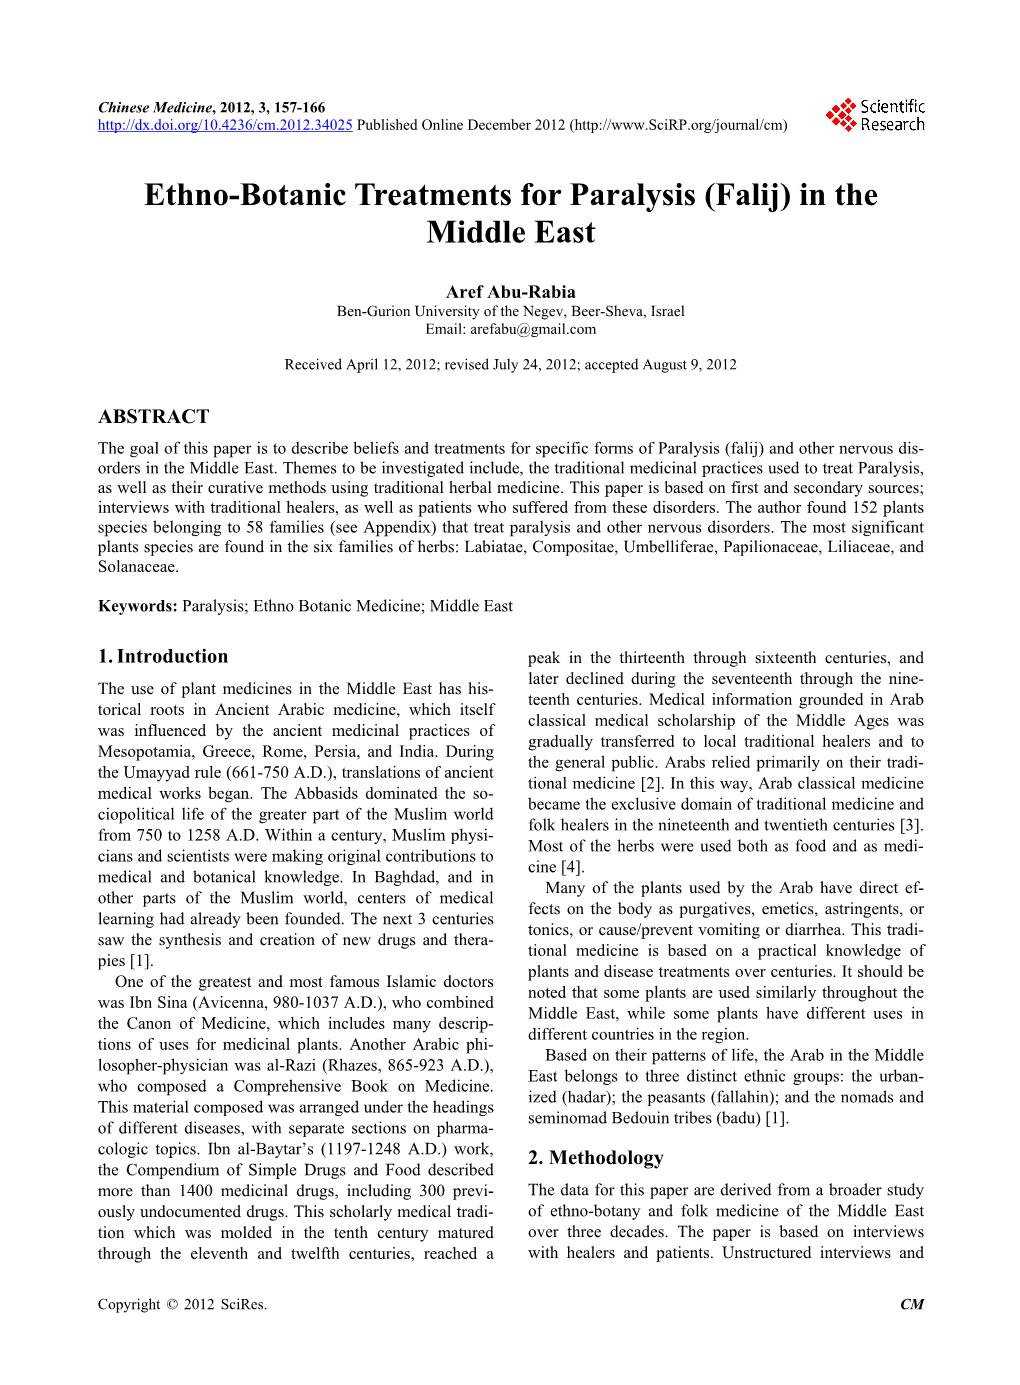 Ethno-Botanic Treatments for Paralysis (Falij) in the Middle East